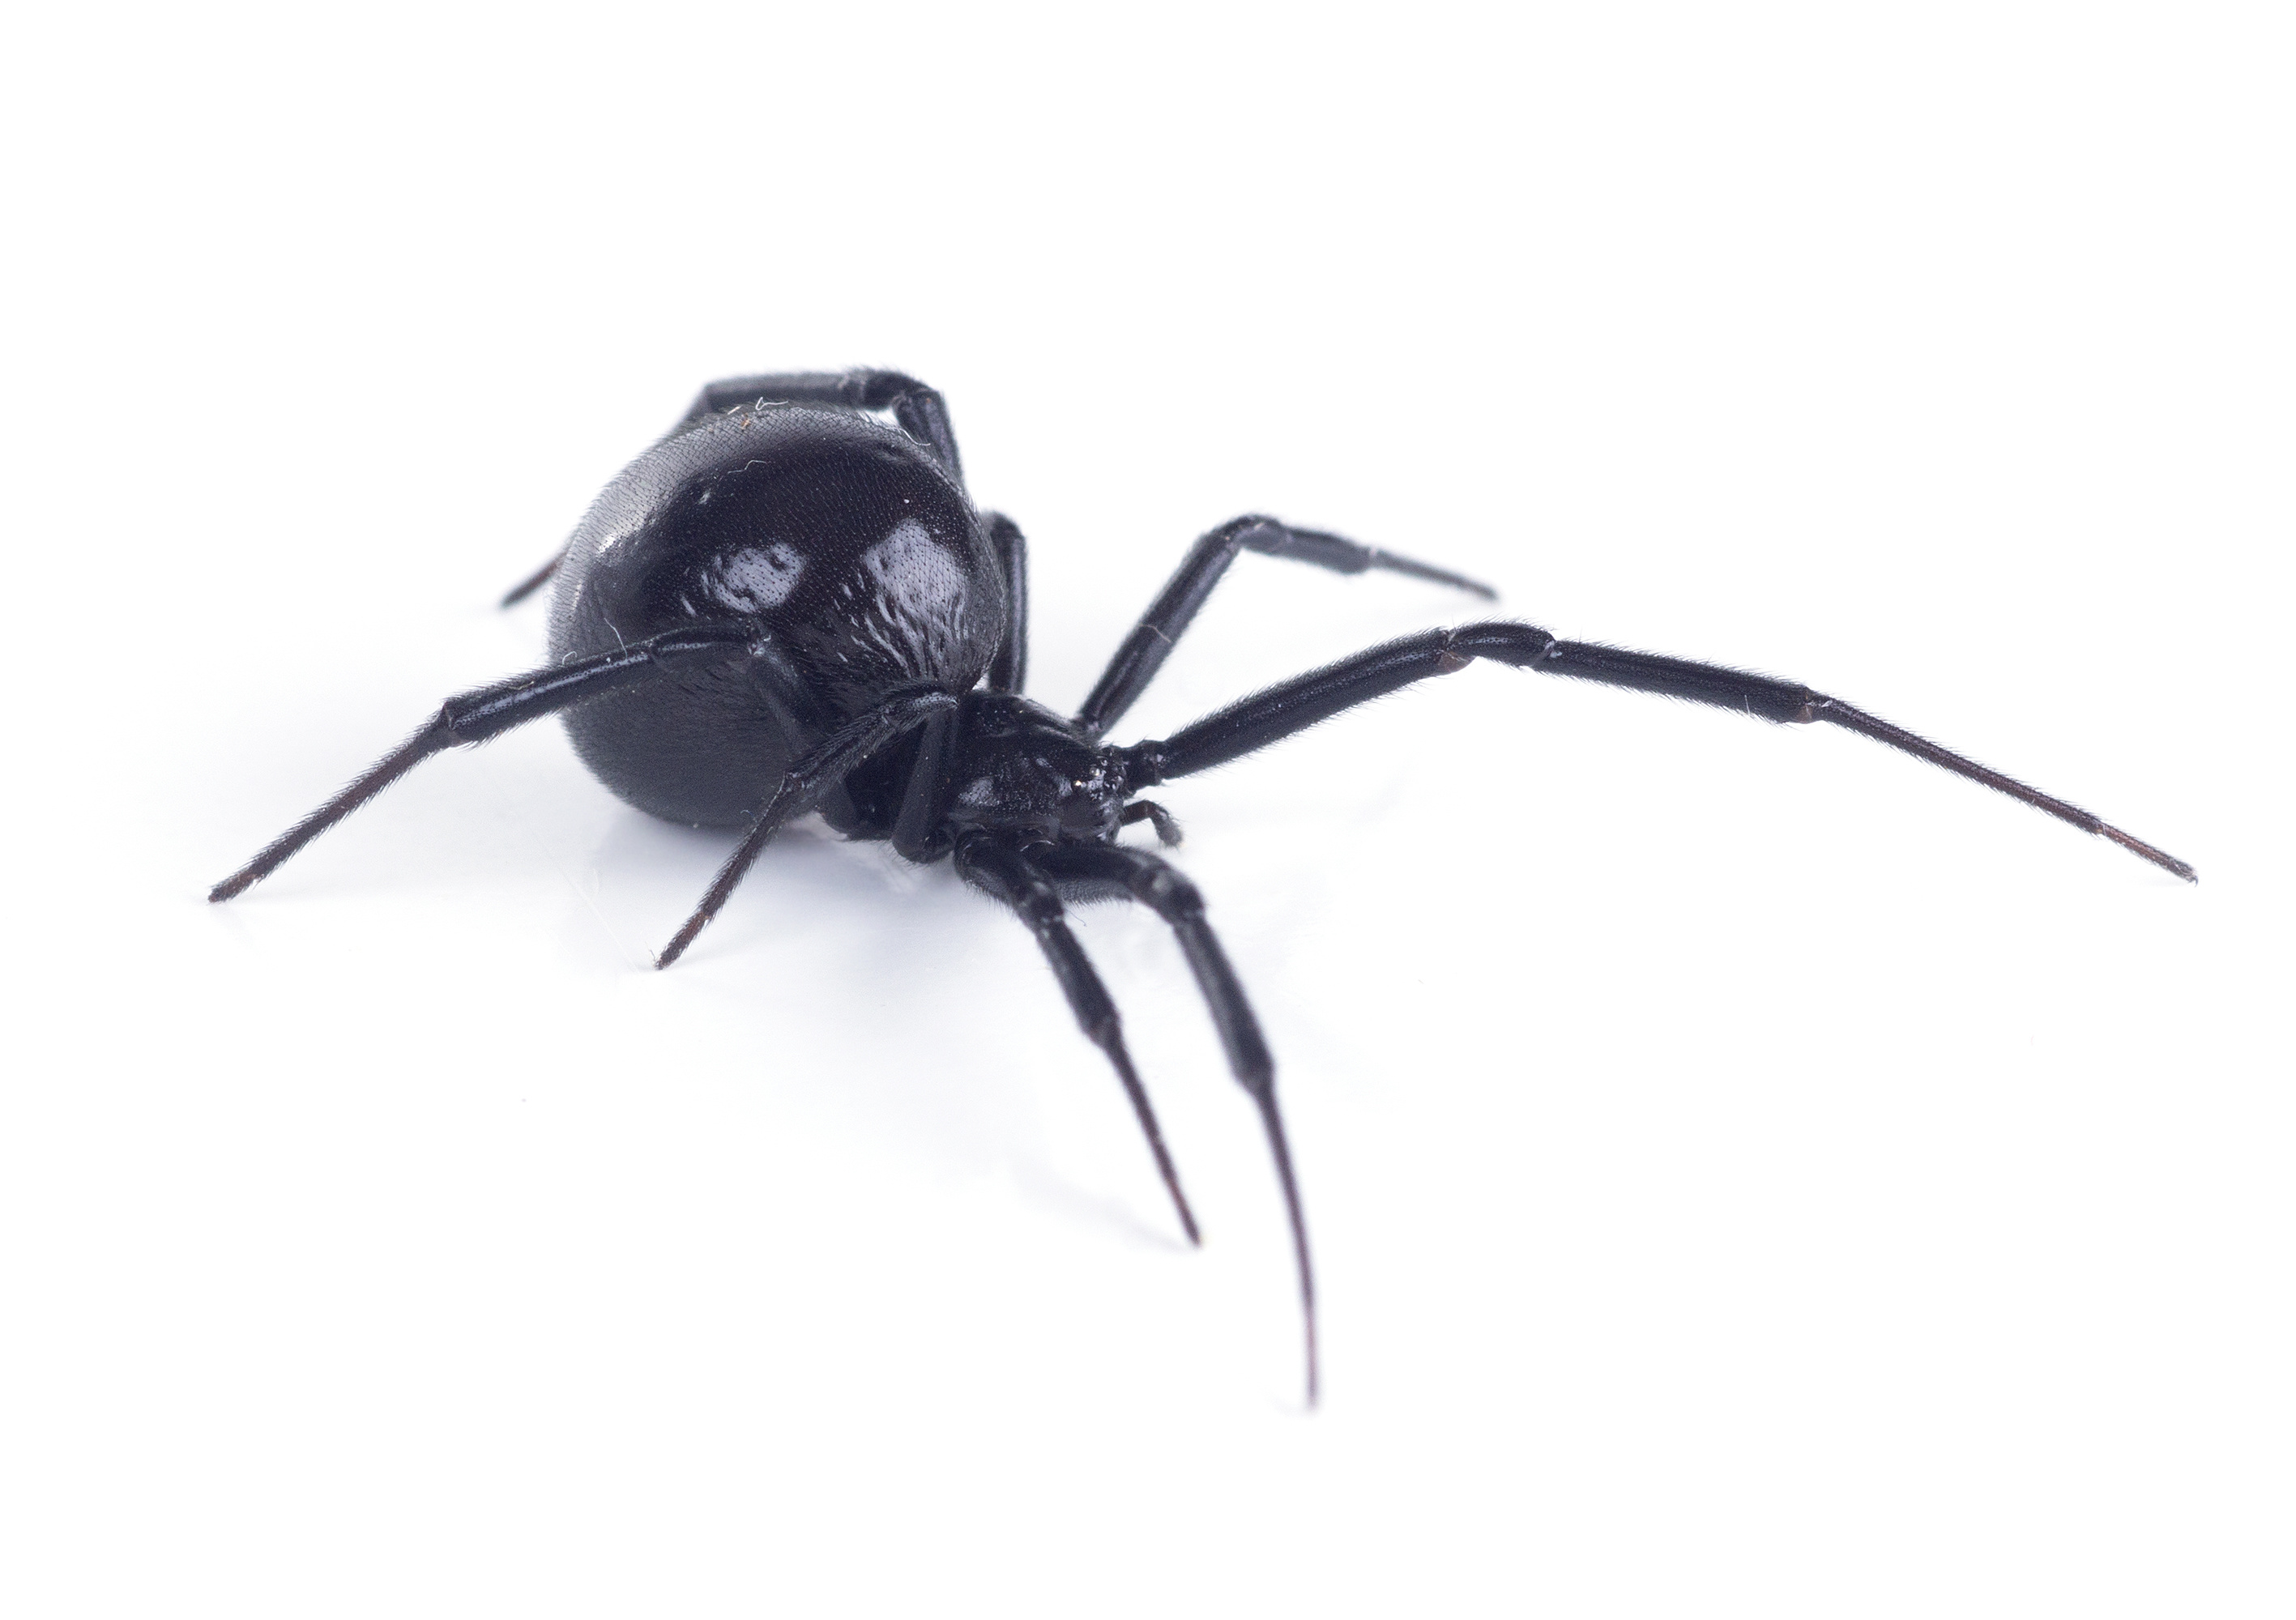 Black Widow Spider Bite: What Does It Look Like?